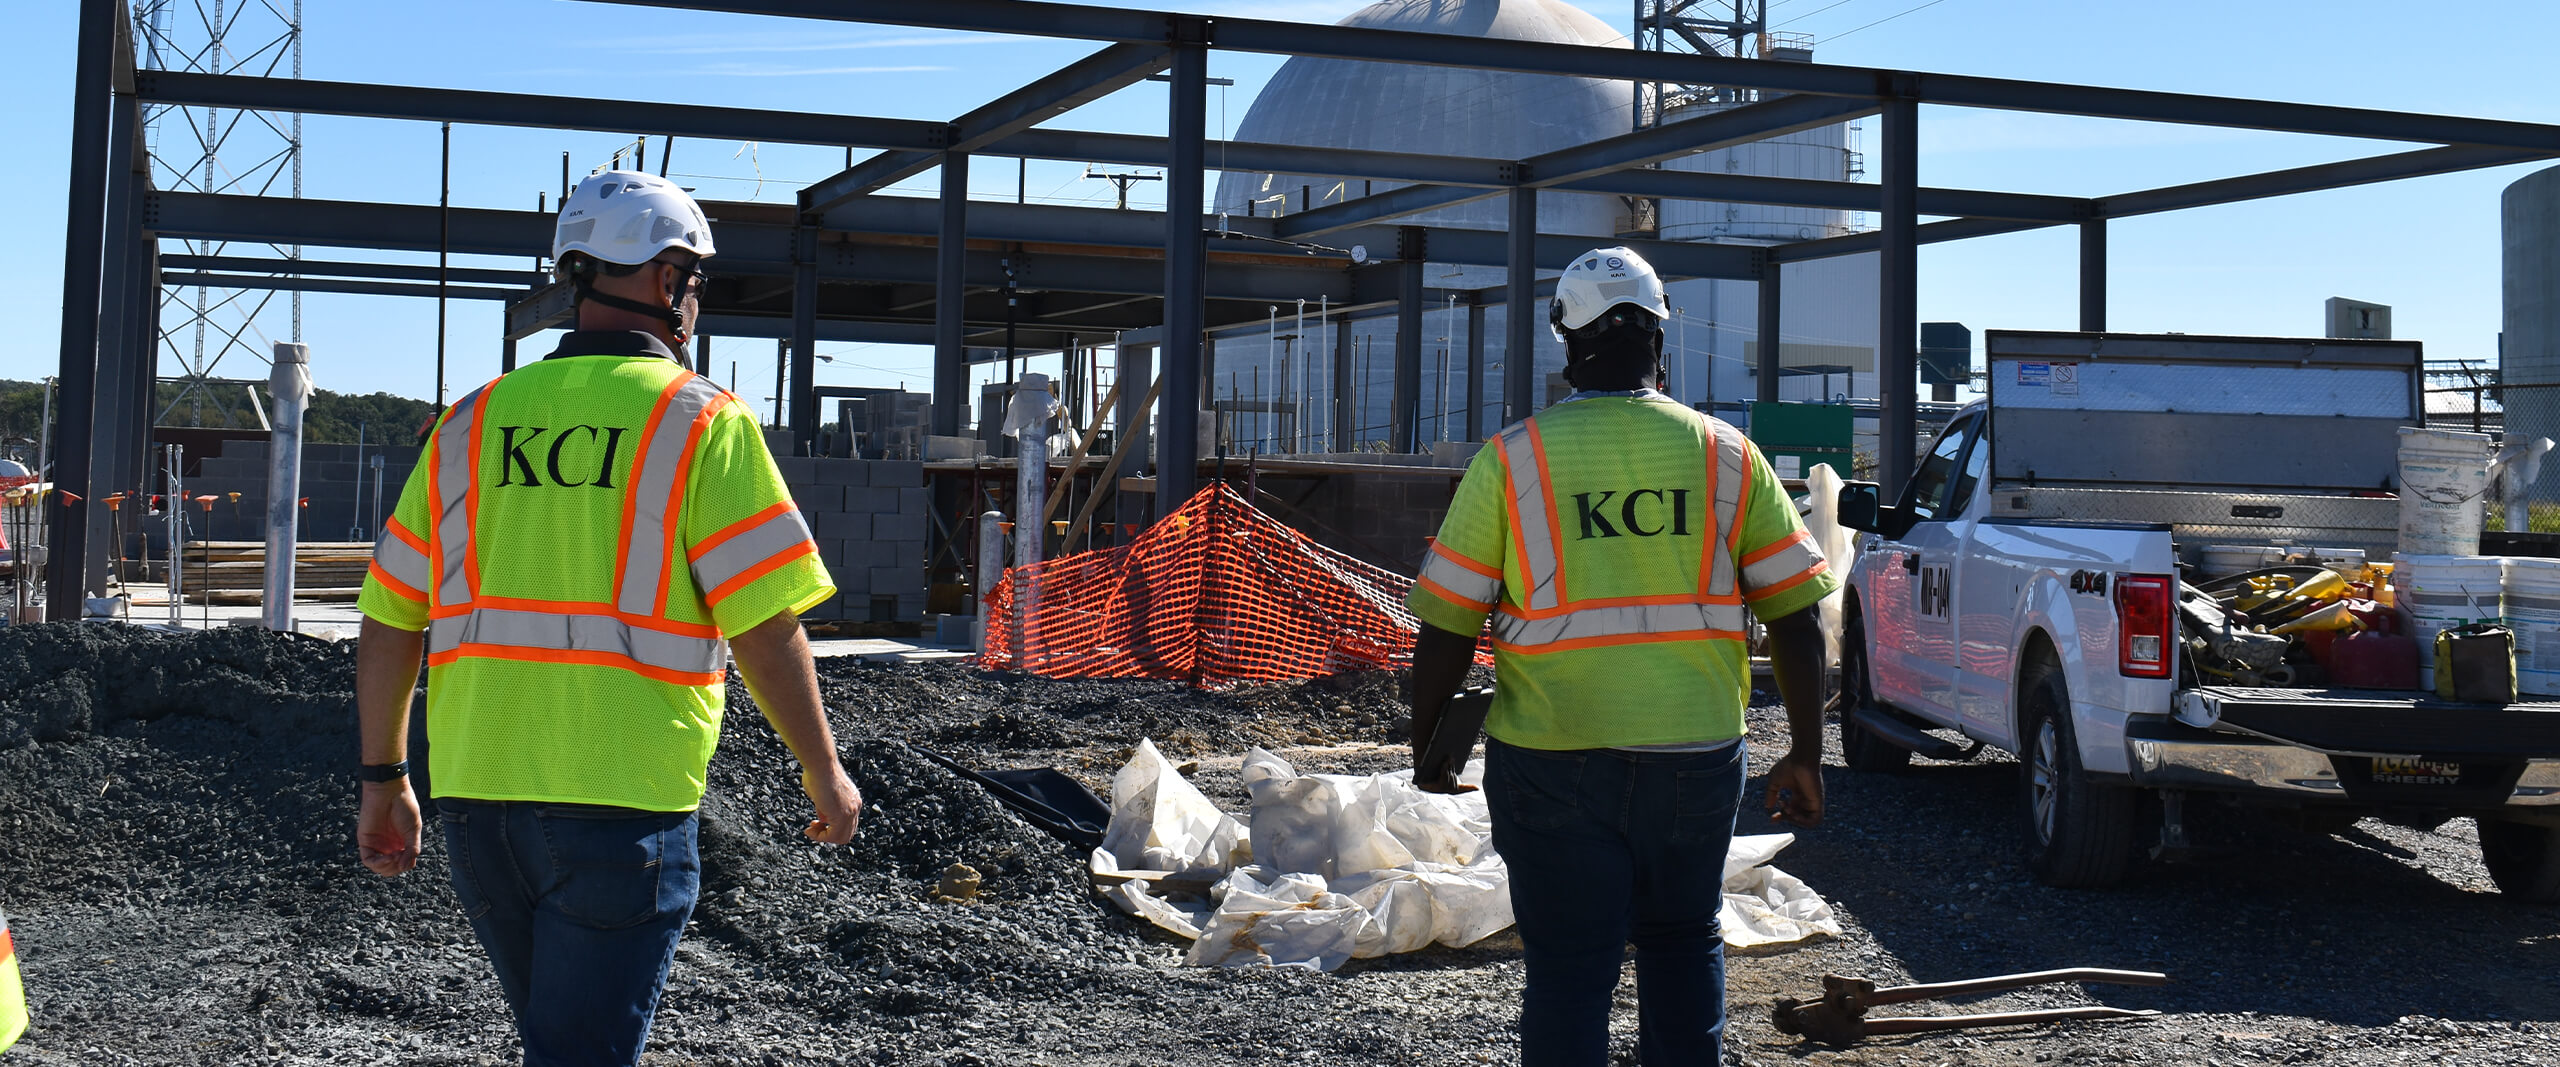 Two KCI employees supervise a job site